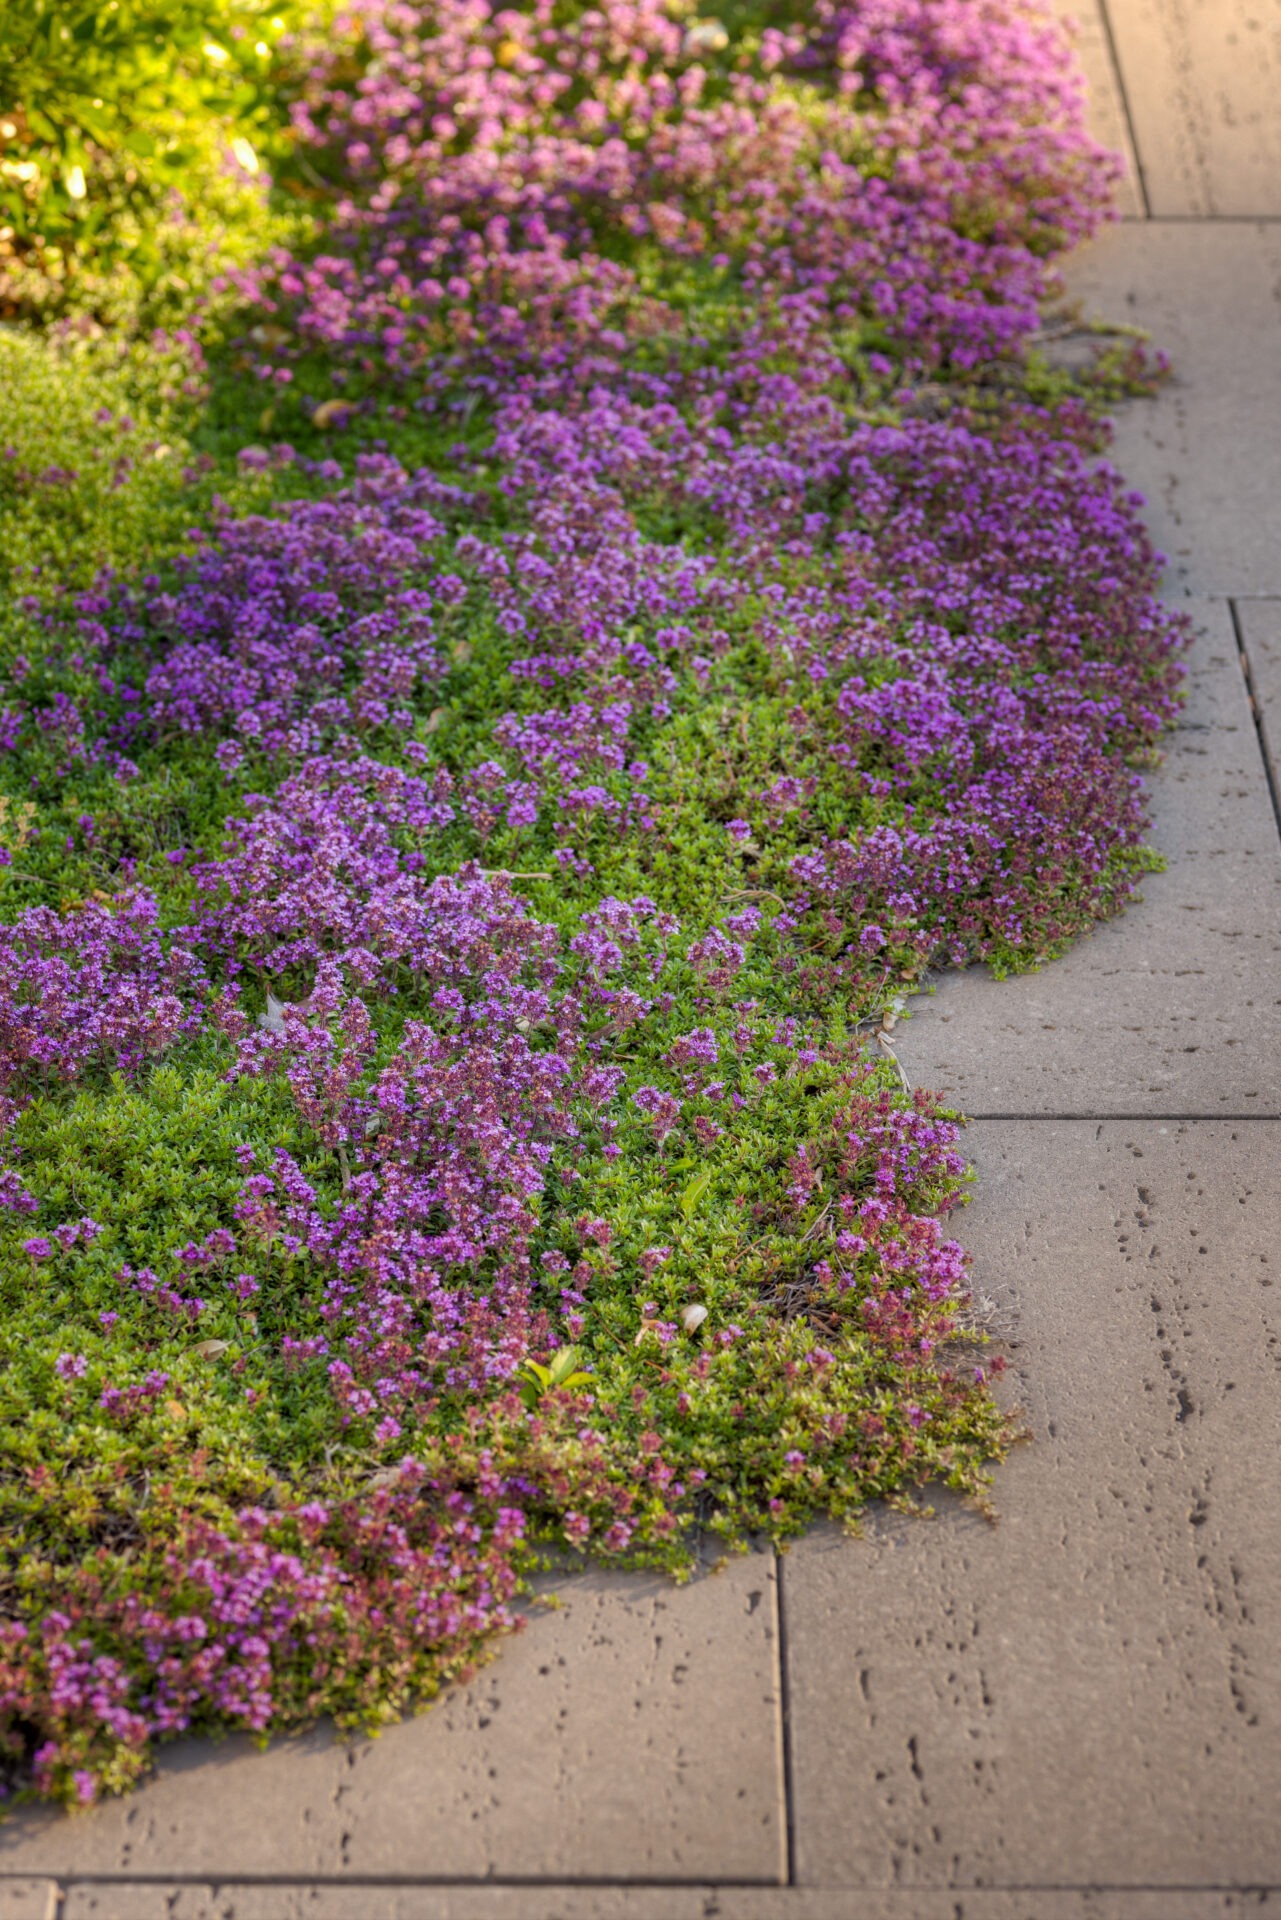 A pathway with large patches of vibrant purple flowers spilling over onto concrete slabs, illuminated by soft sunlight filtering through foliage.